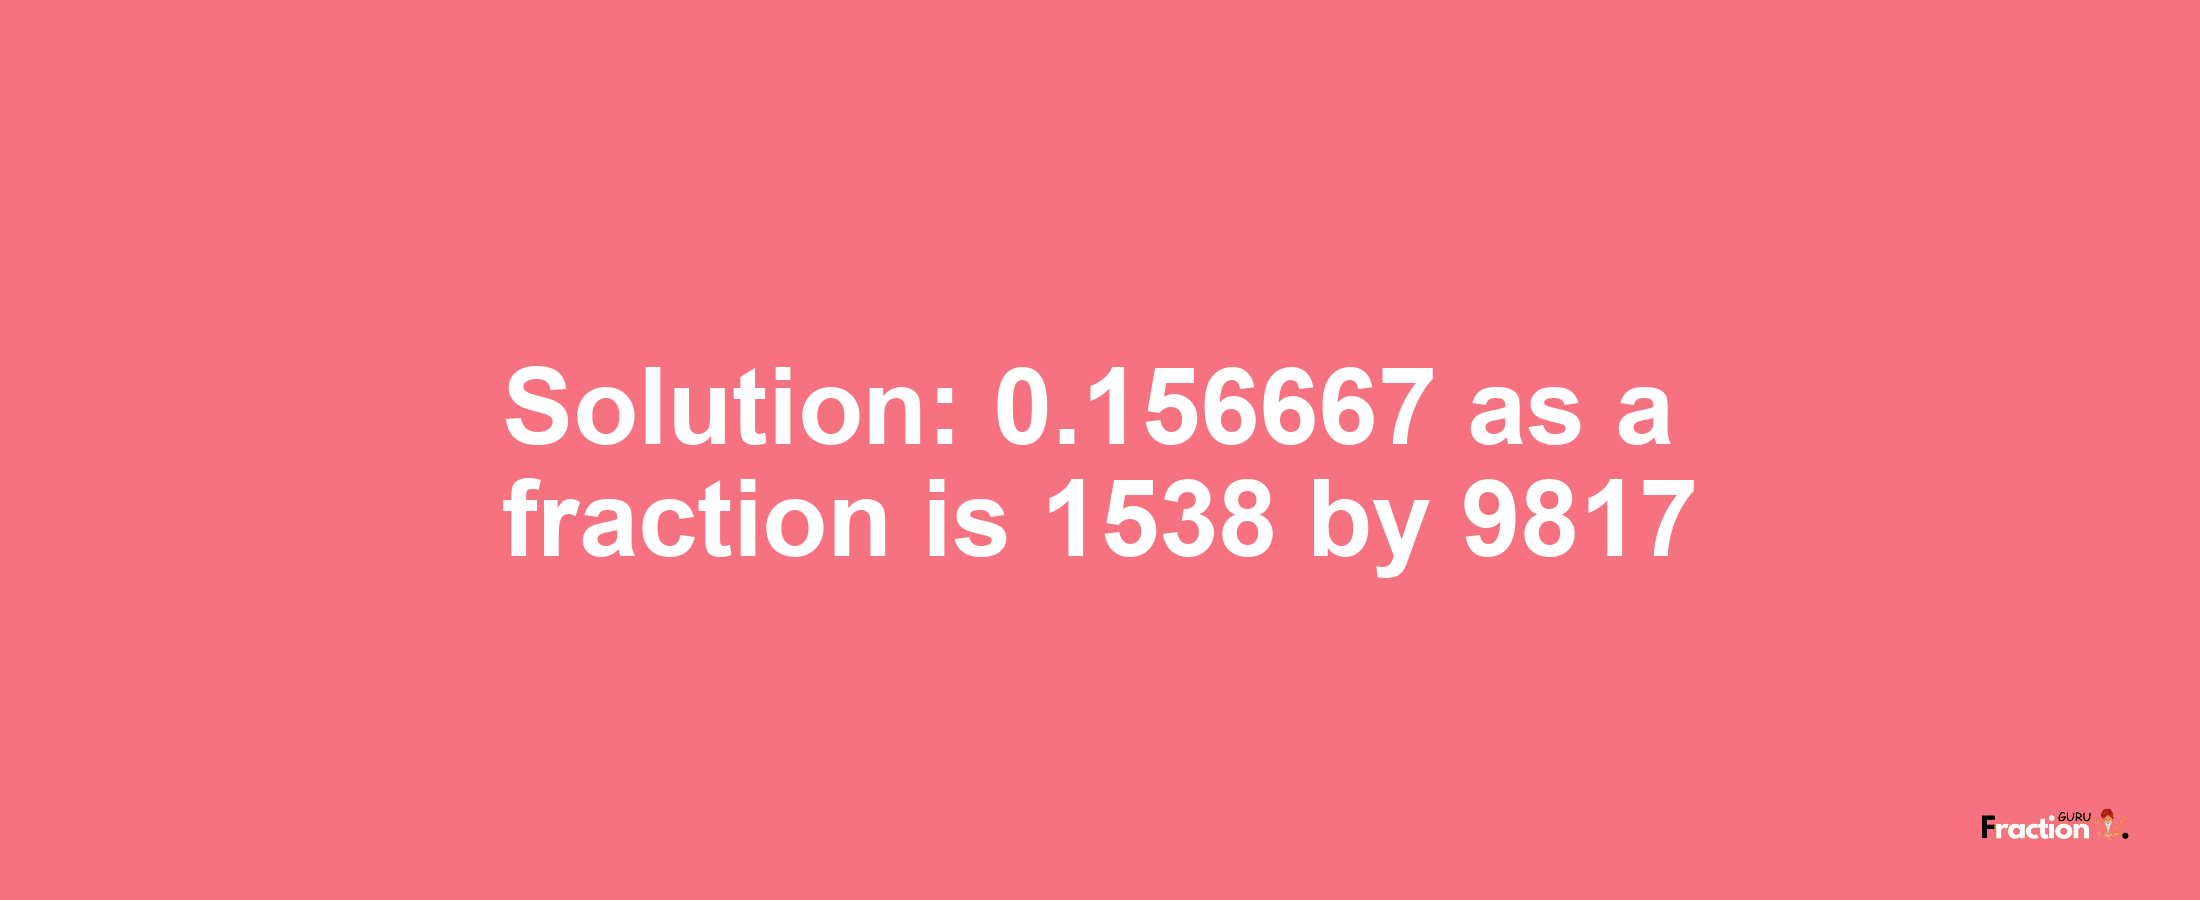 Solution:0.156667 as a fraction is 1538/9817